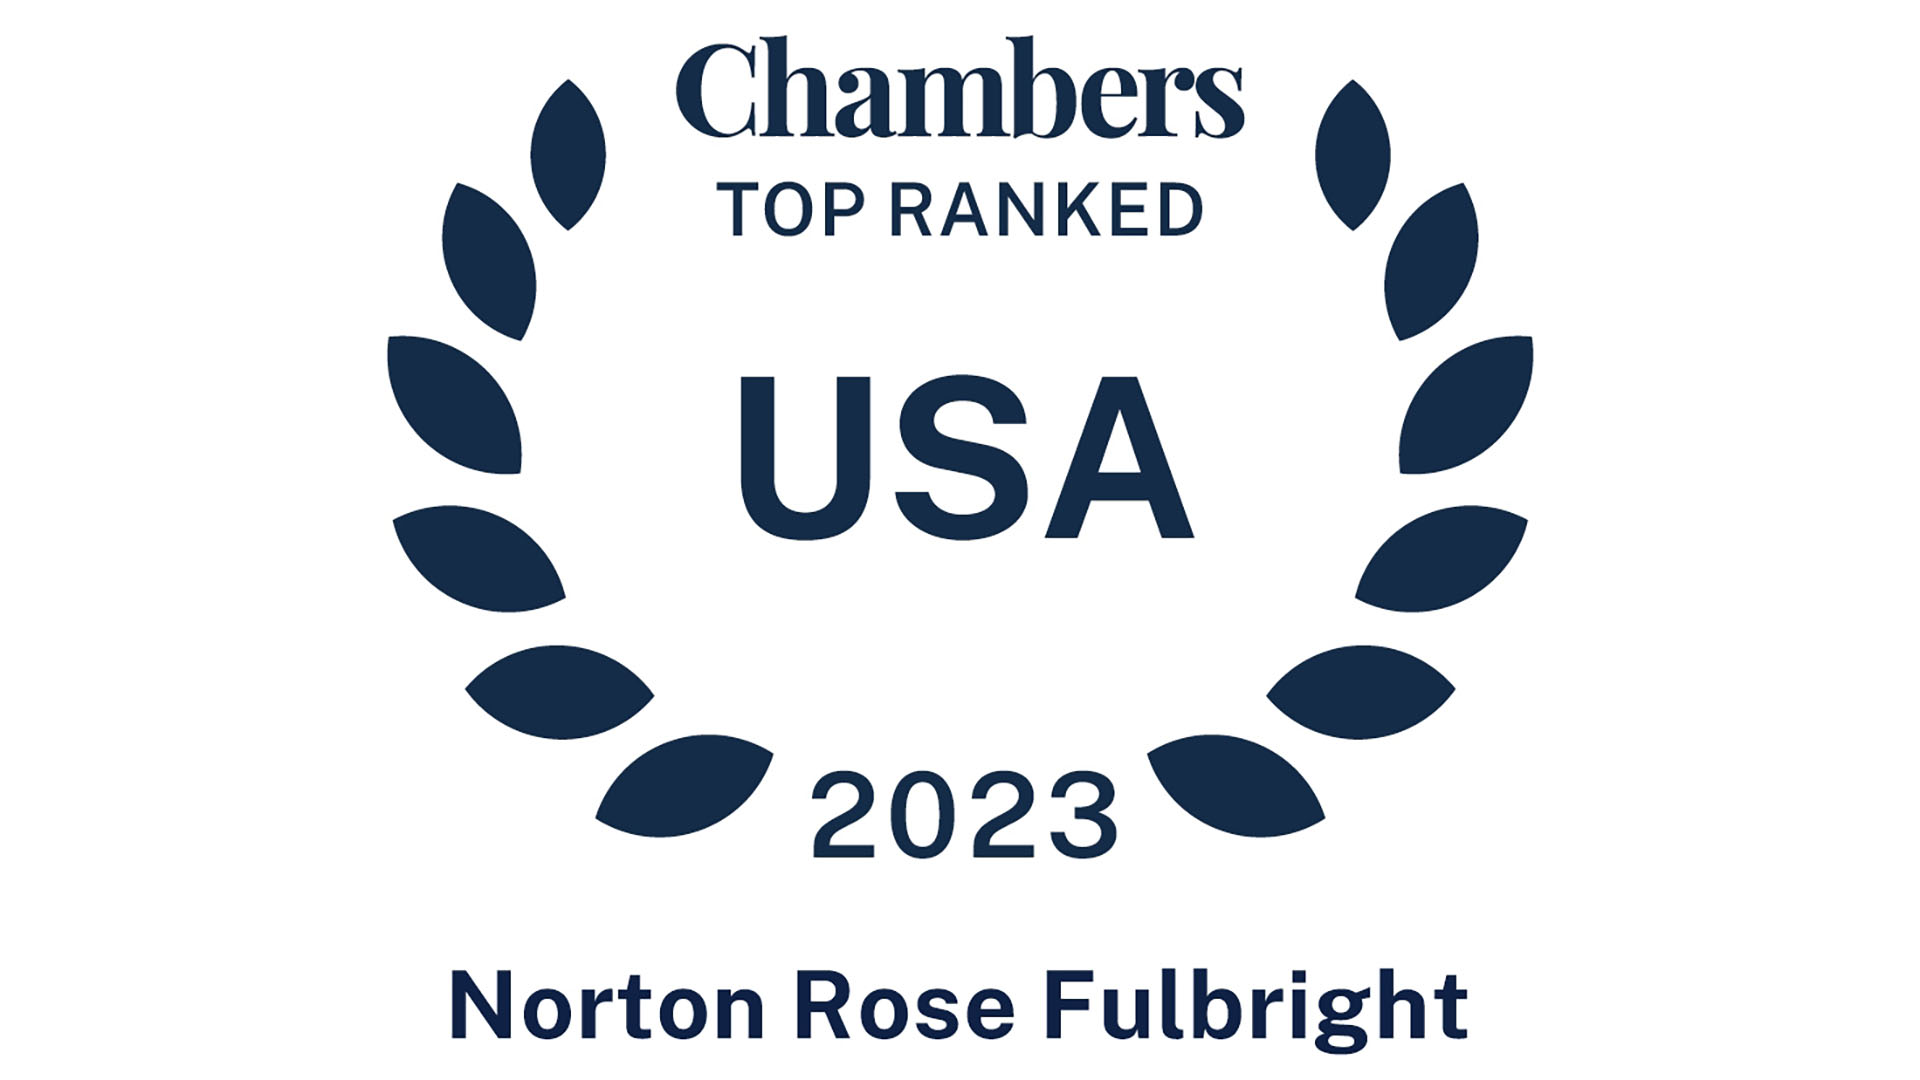 Chambers Top Ranked | USA | 2023 | Norton Rose Fulbright